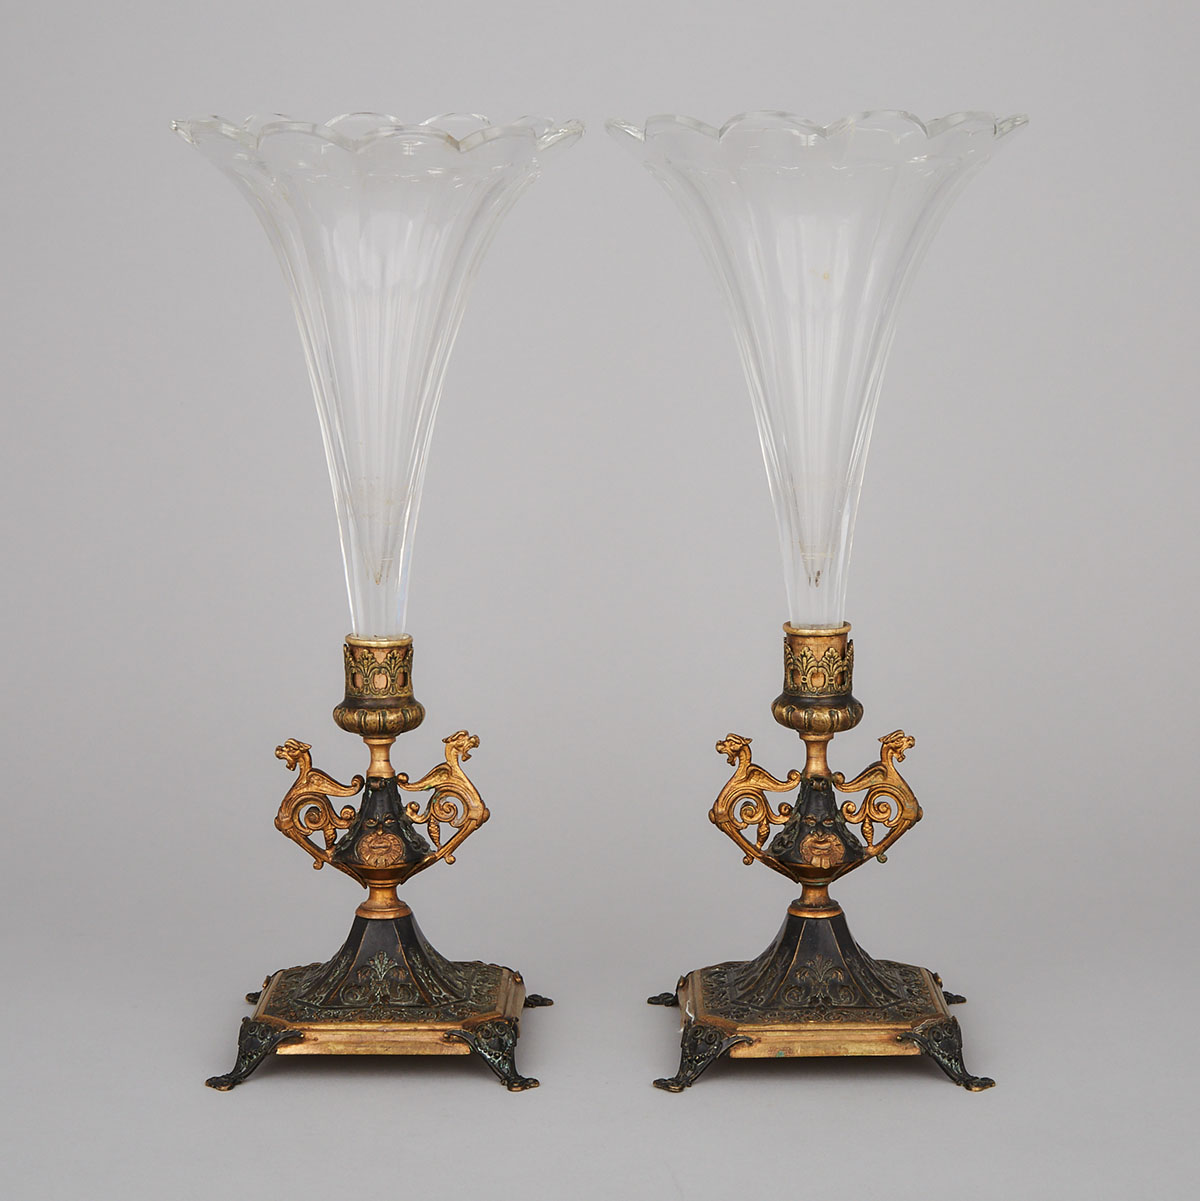 Pair of French Aesthetic Movement Cut Glass and Bronze Trumpet Vases, c.1870